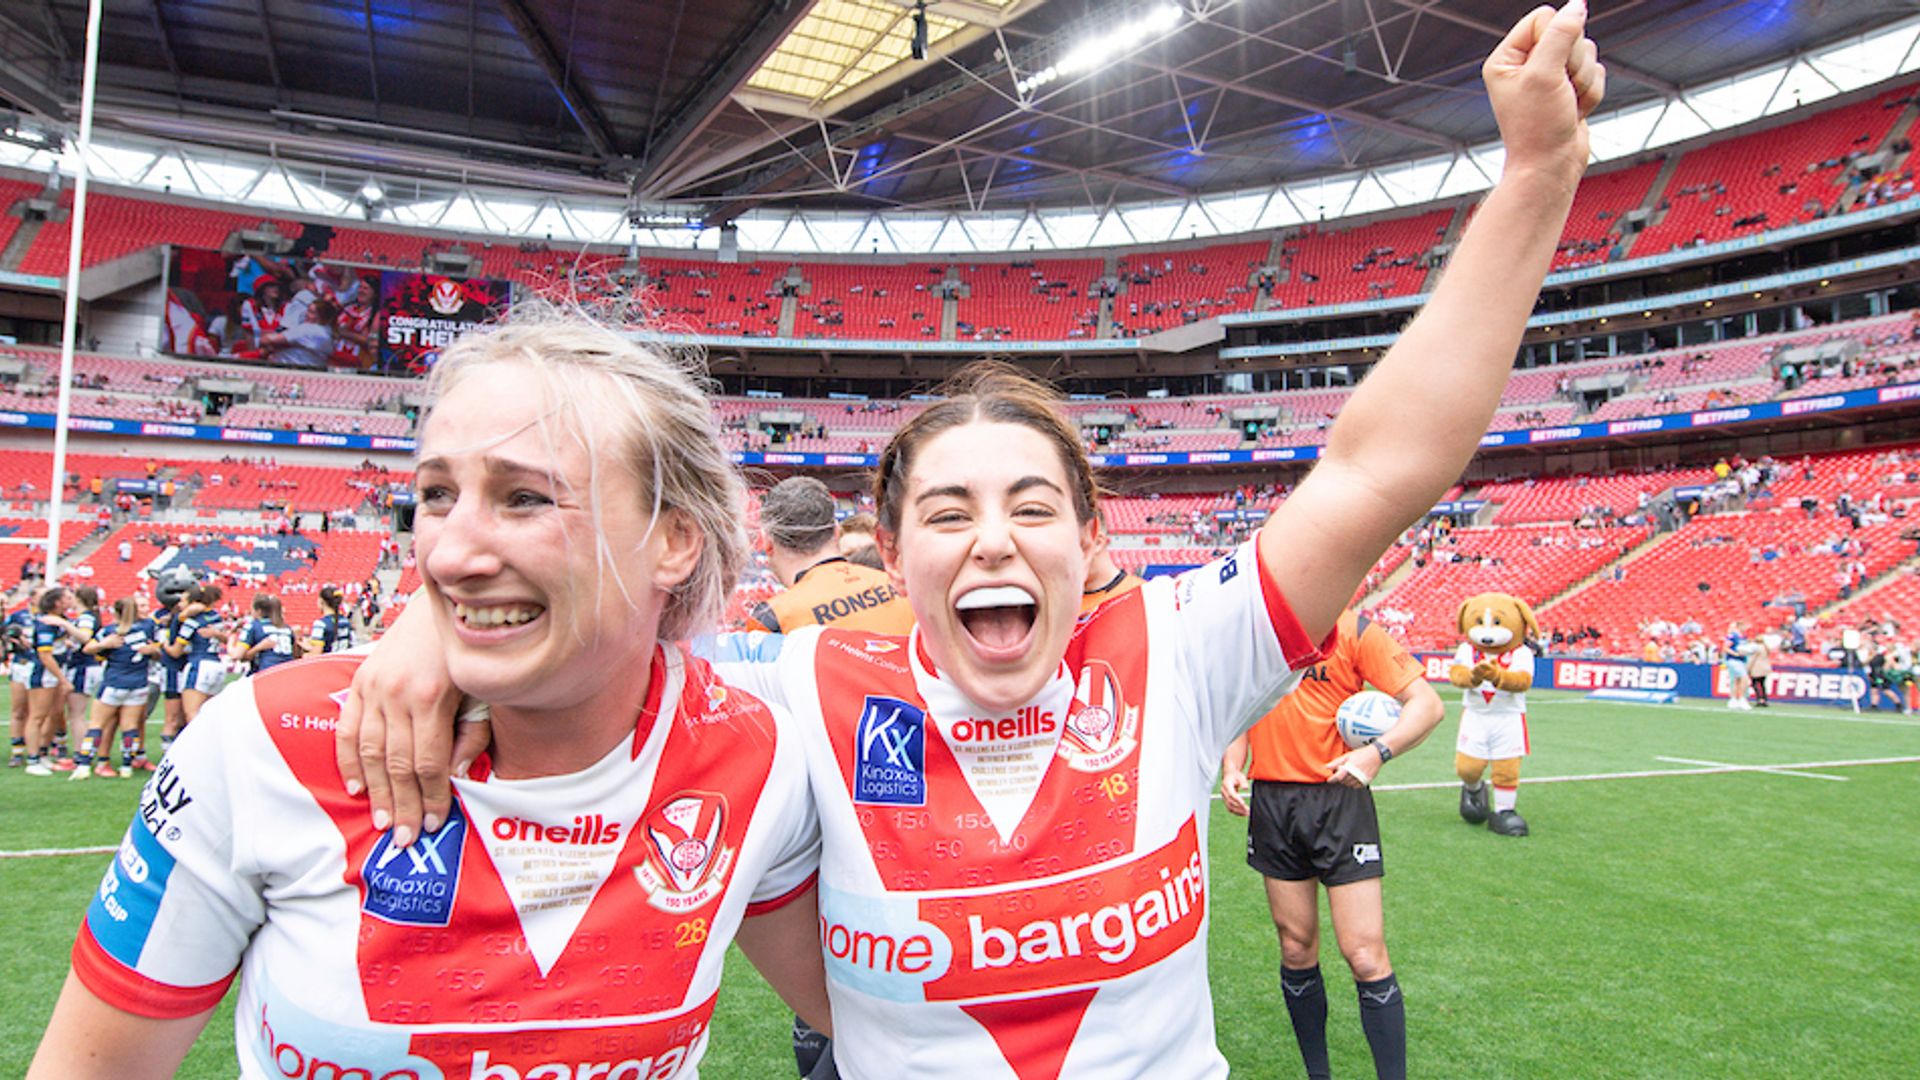 Cunningham: Challenge Cup win at Wembley a 'dream come true'